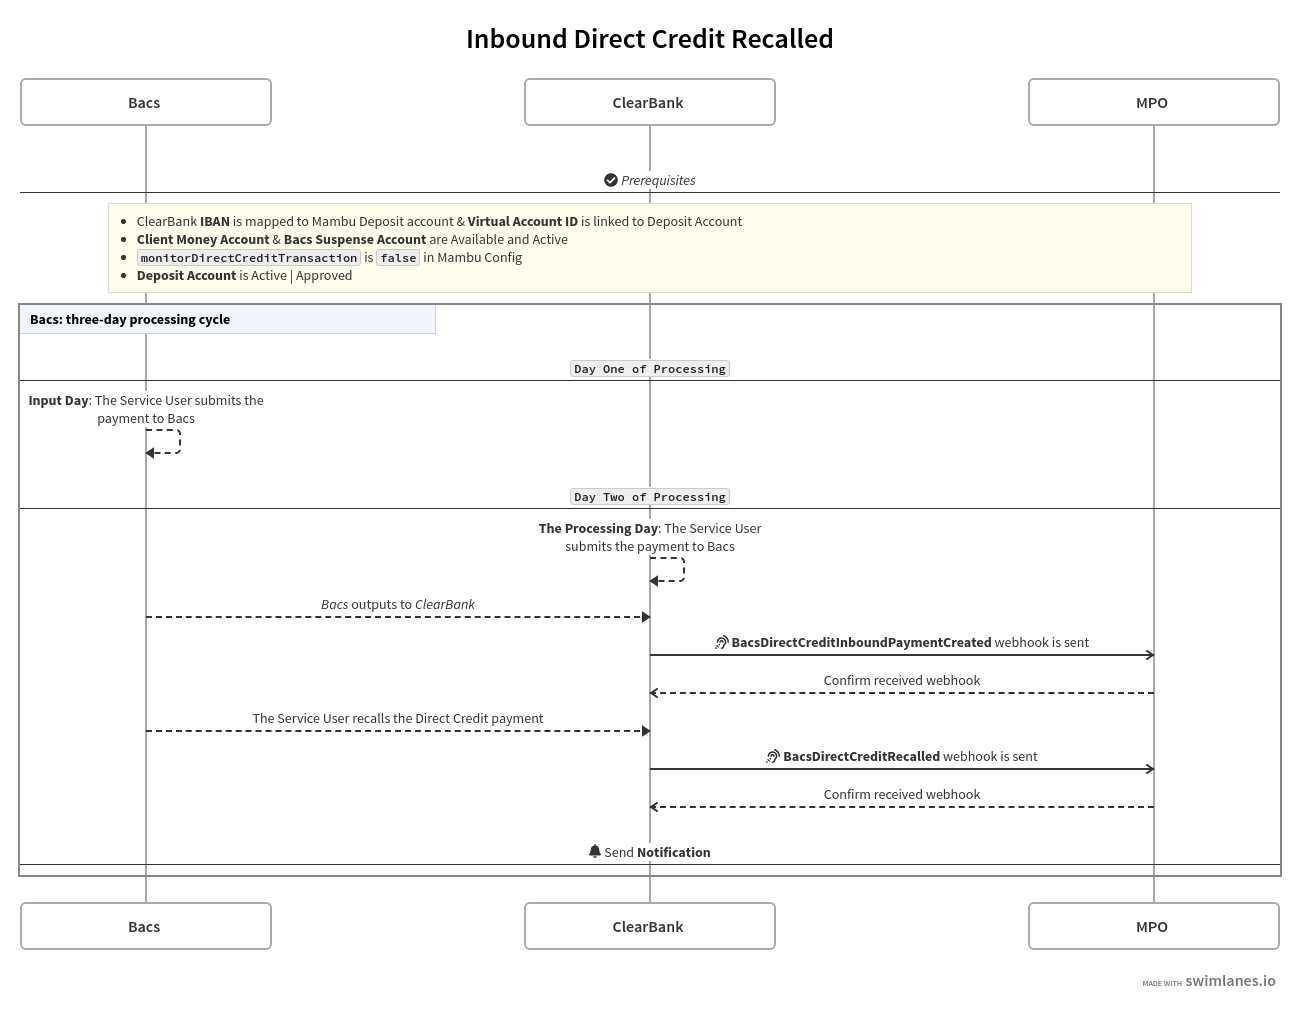 ClearBank Retail Banking: Inbound Direct Credit Recall 